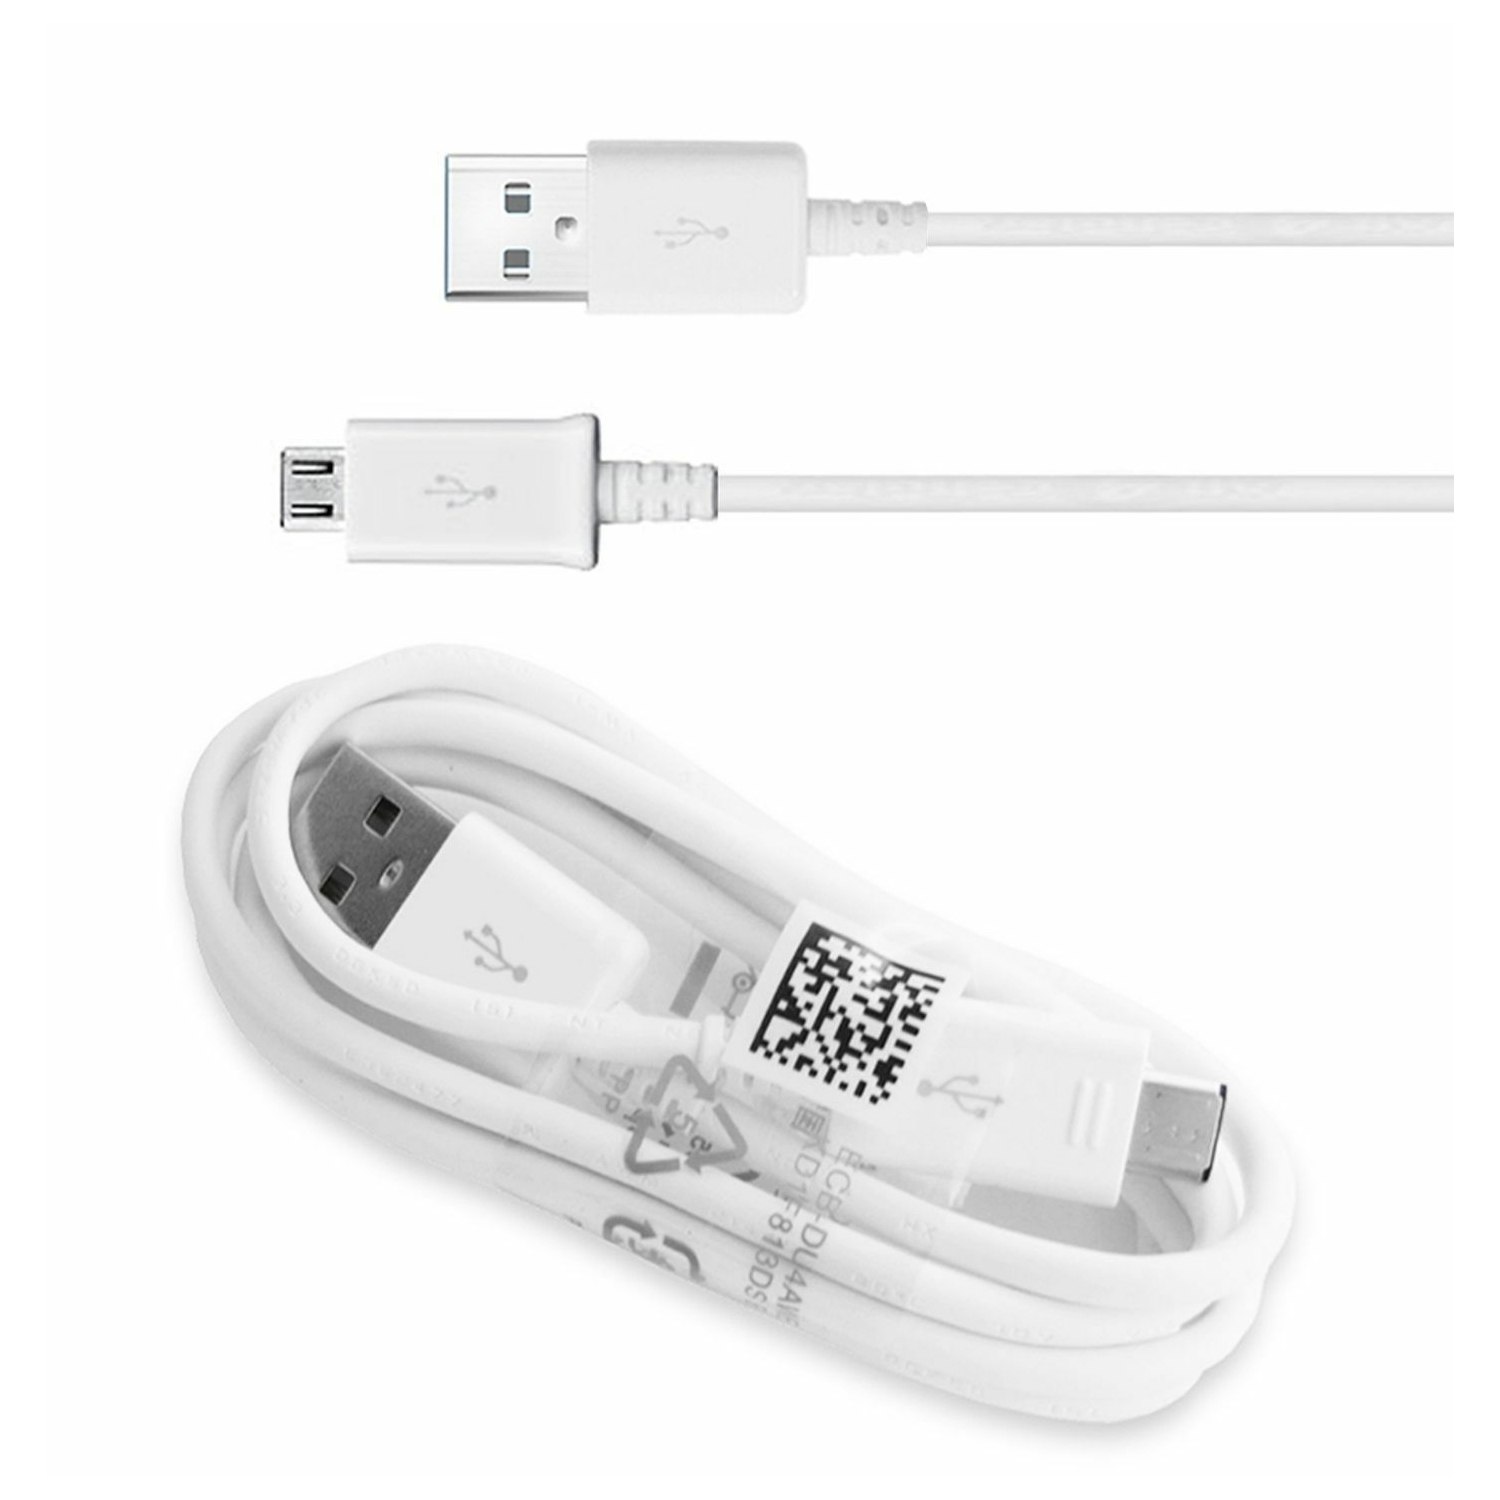 Samsung 3.3Ft/1M Micro USB Charging Data Sync Cable for Samsung Galaxy S3 S4 / Note 2 & Other Smartphones, White